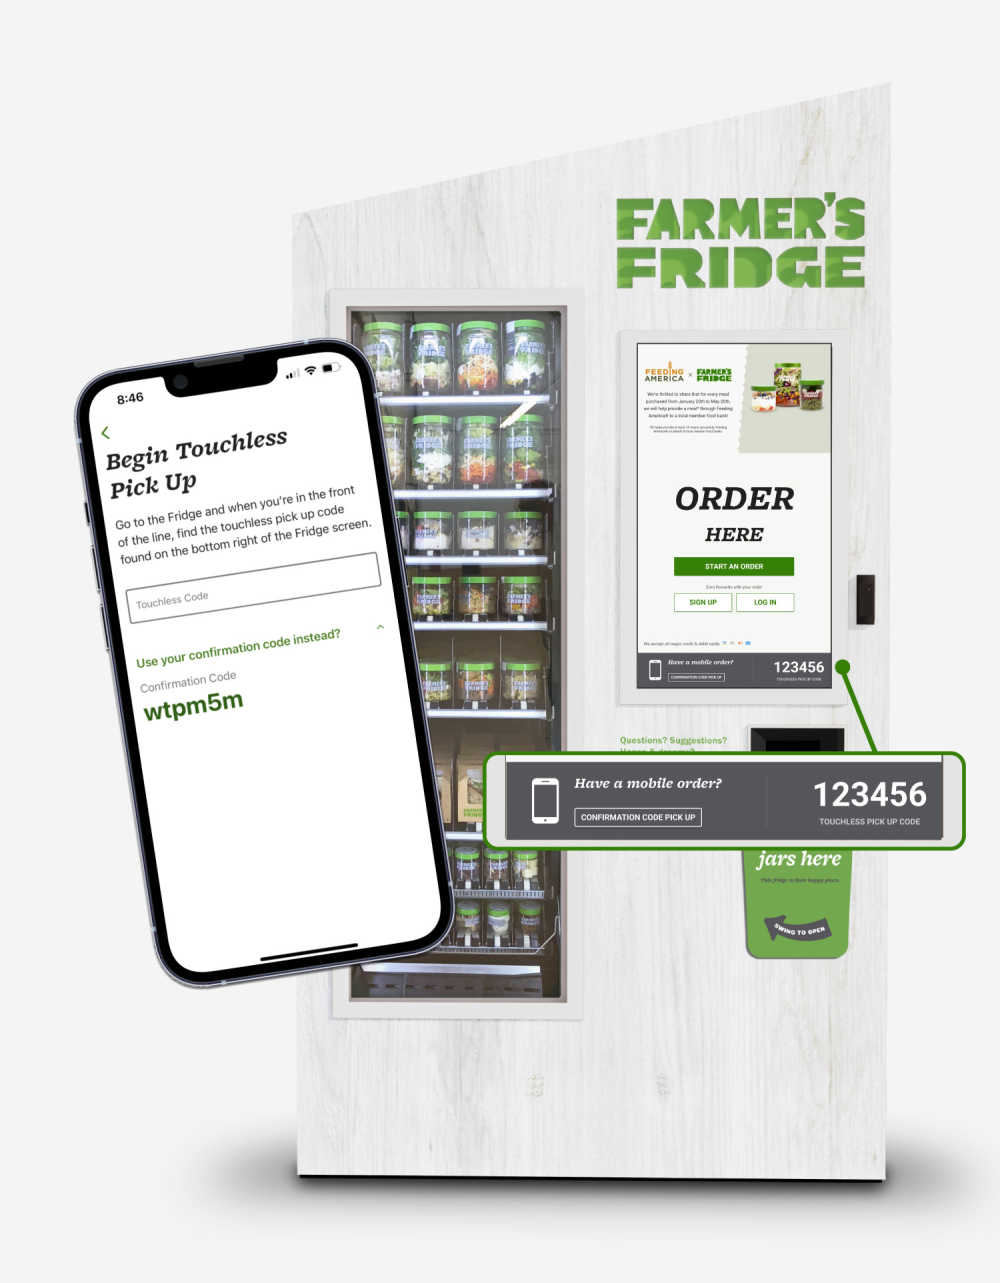 Render of a Farmers Fridge, With a highlighted image of the section if the fridge that depicts the mobile order pick-up number. 